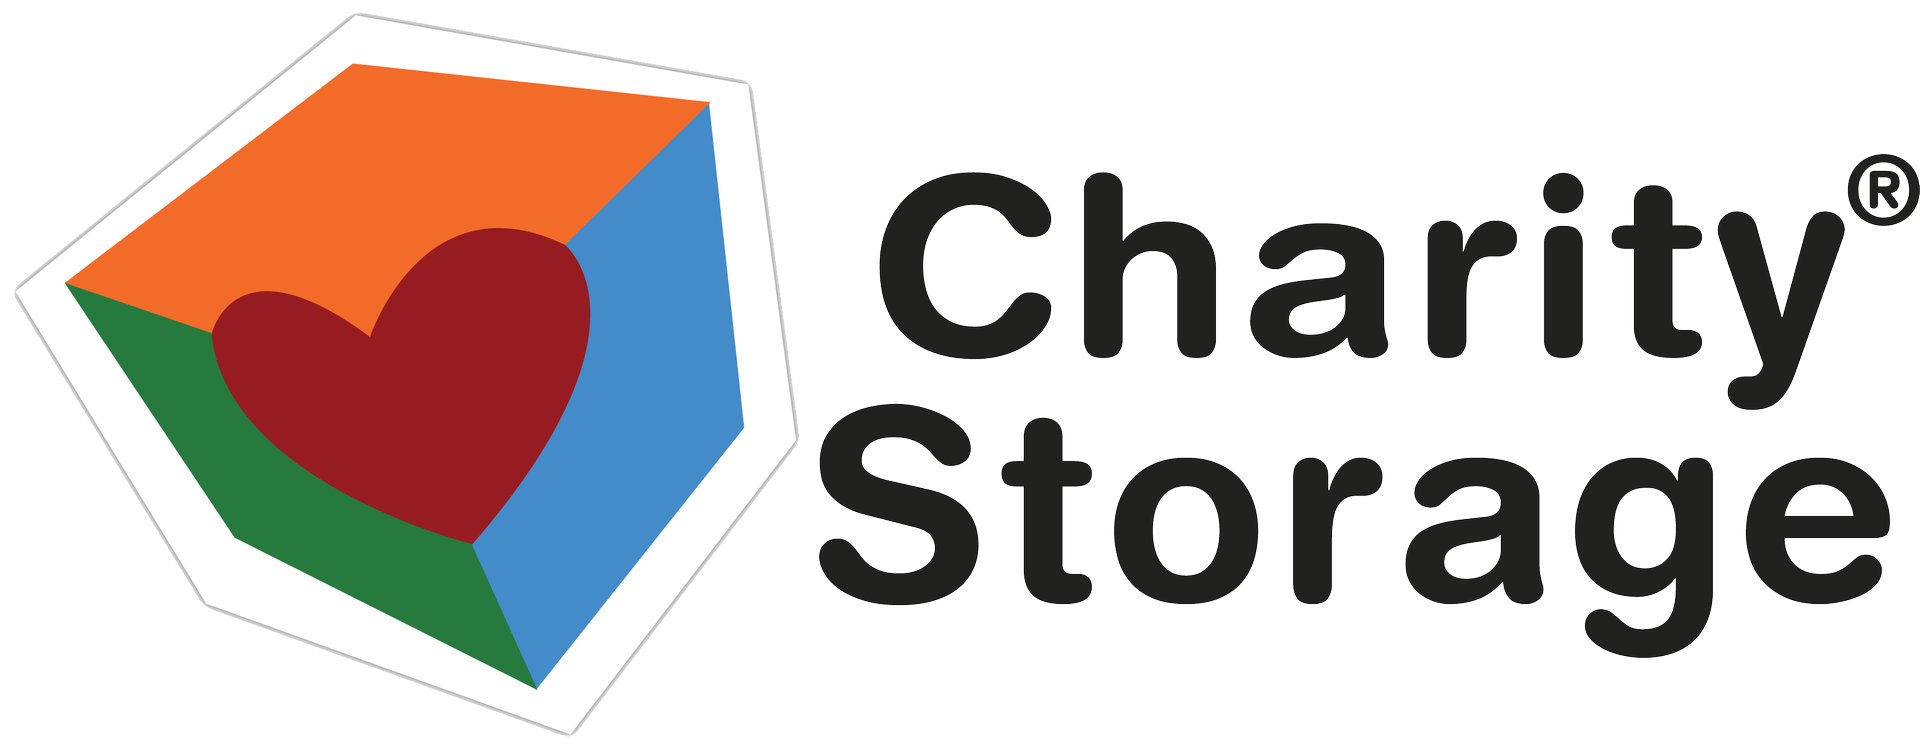 Charity Storage charity auction platform to give back